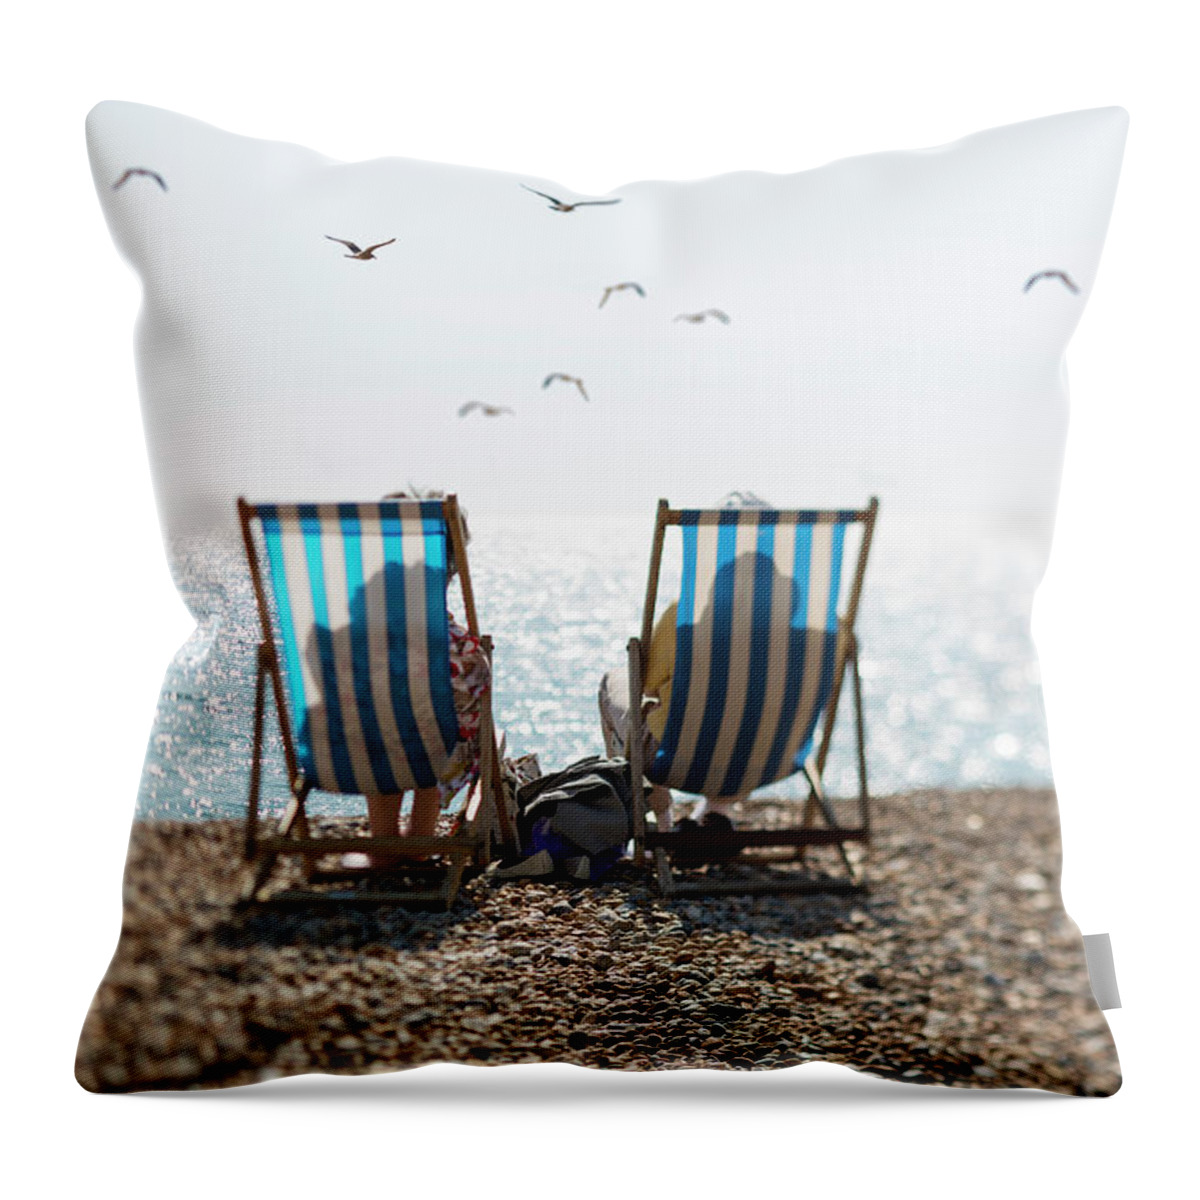 Tranquility Throw Pillow featuring the photograph Two People On Deckchairs And Seagulls by Richard Boll